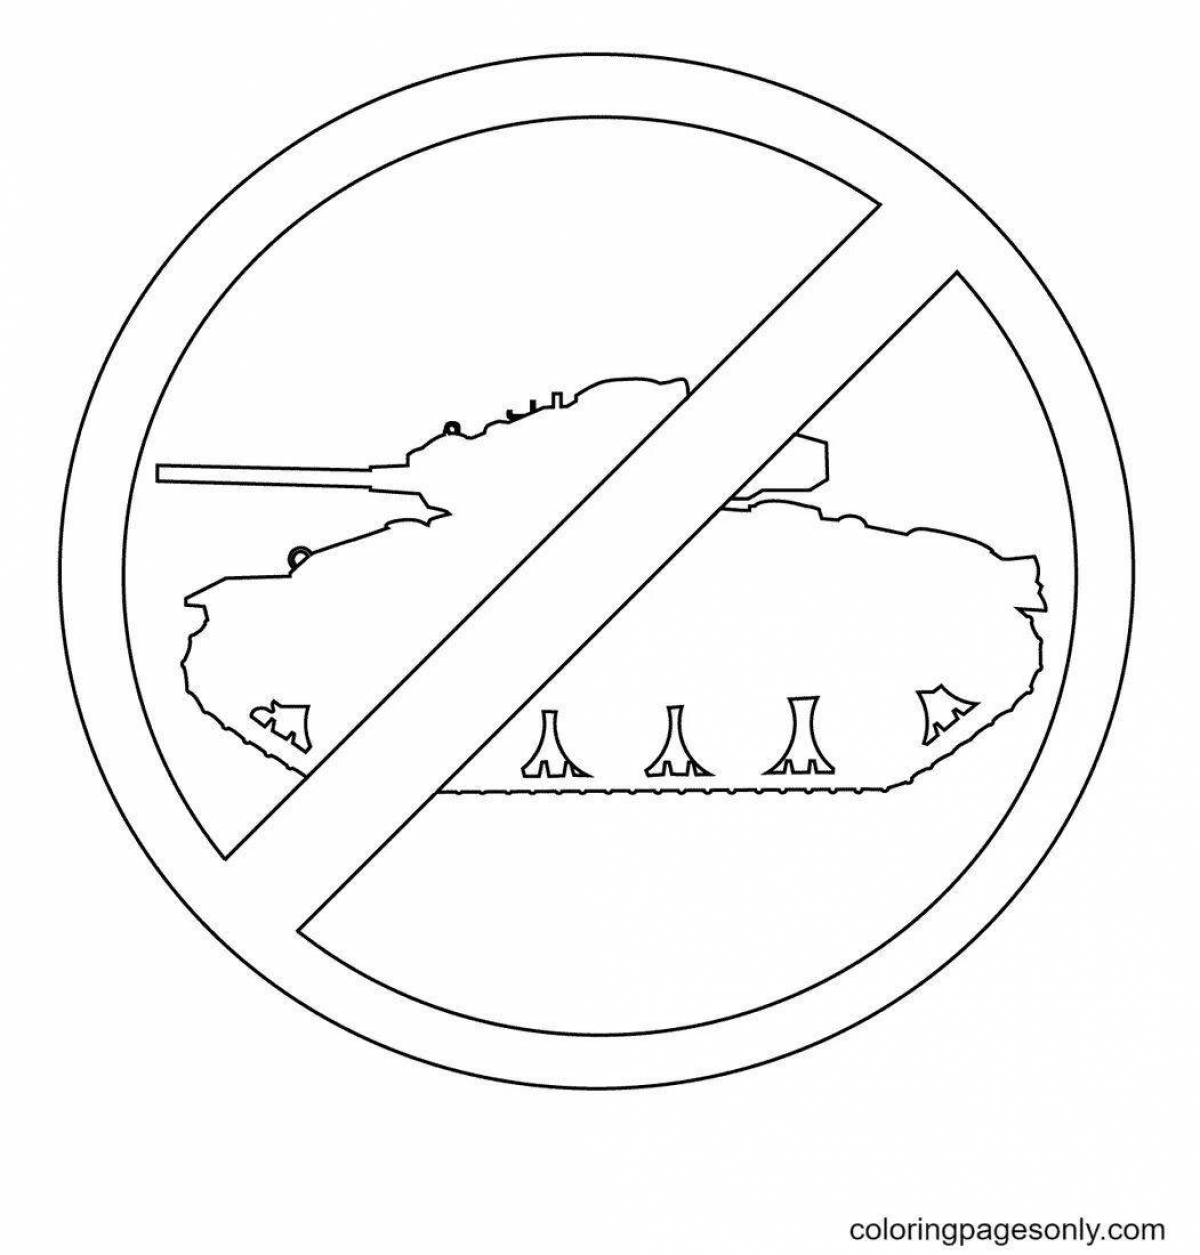 Fun coloring book: terrorism is not for kids